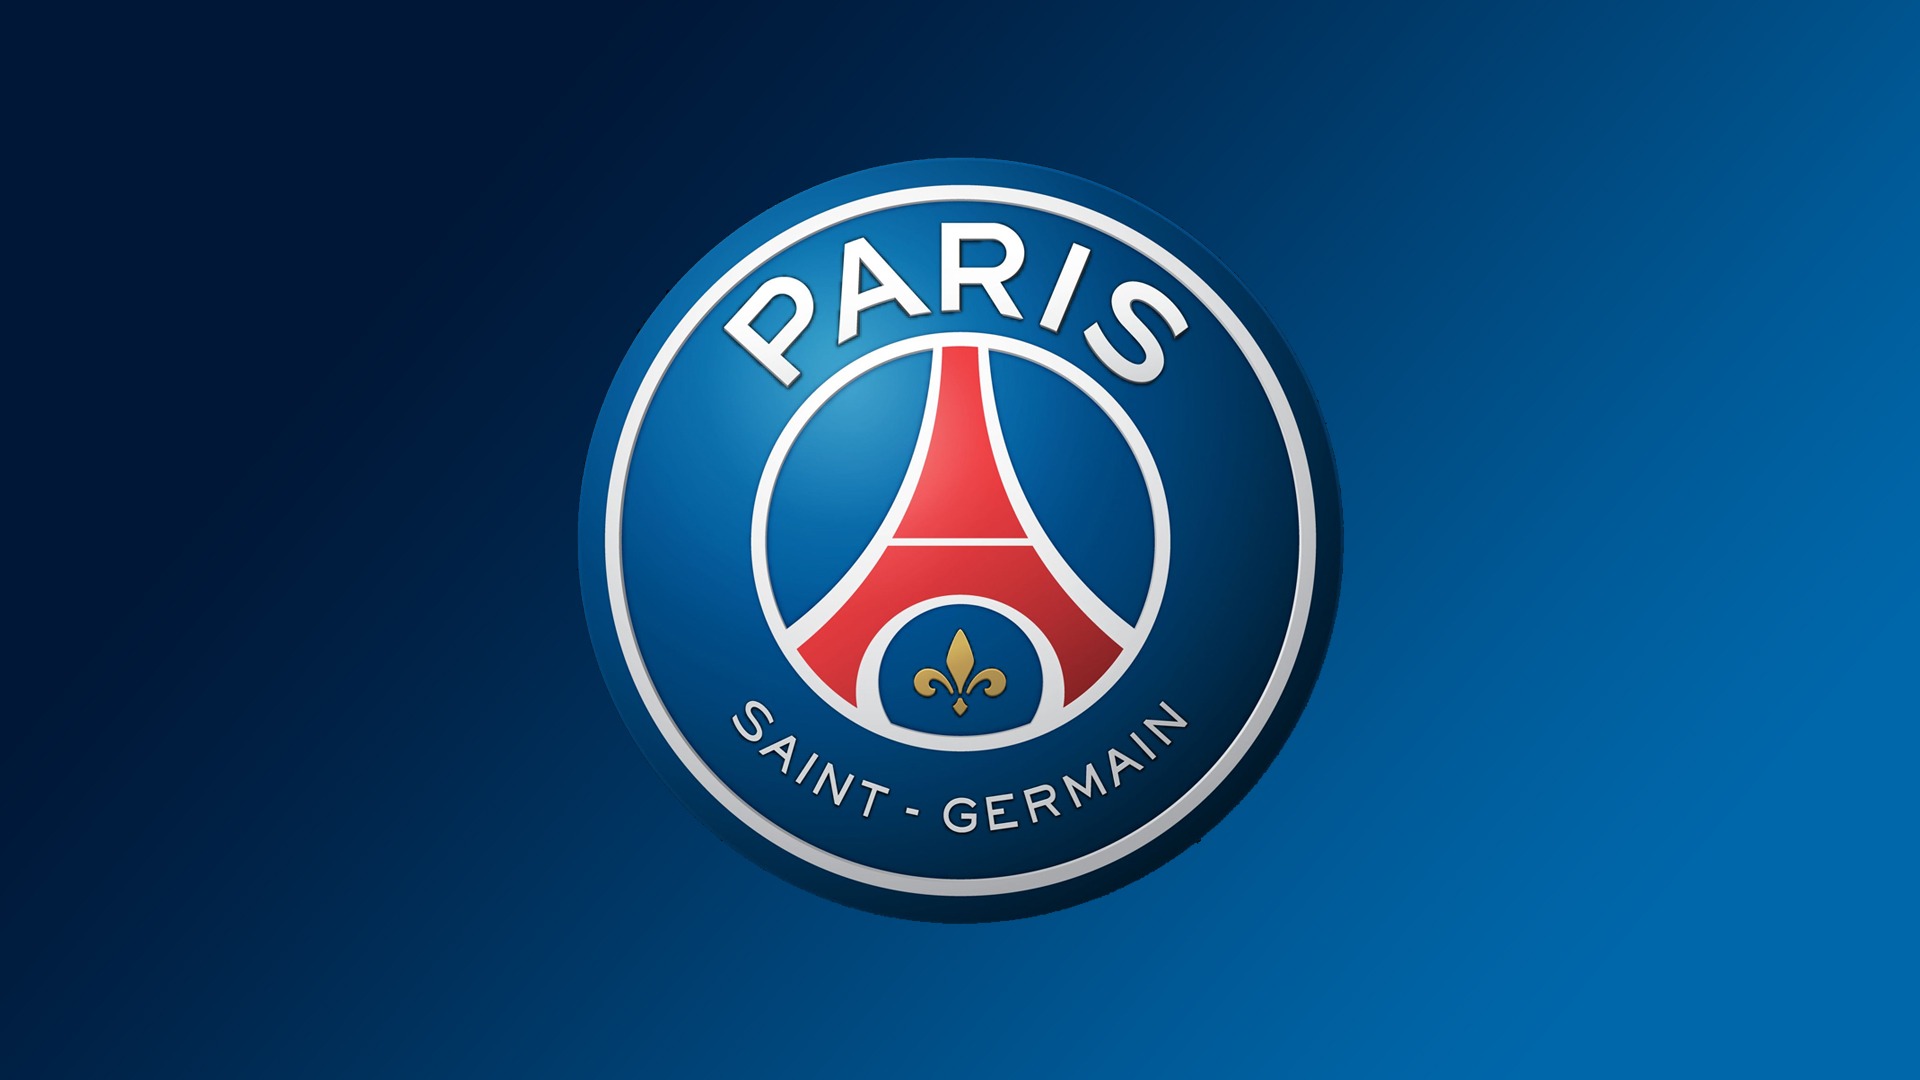 Paris Saint-Germain Football Club has applied for a trademark to join the Metaverse and NFT